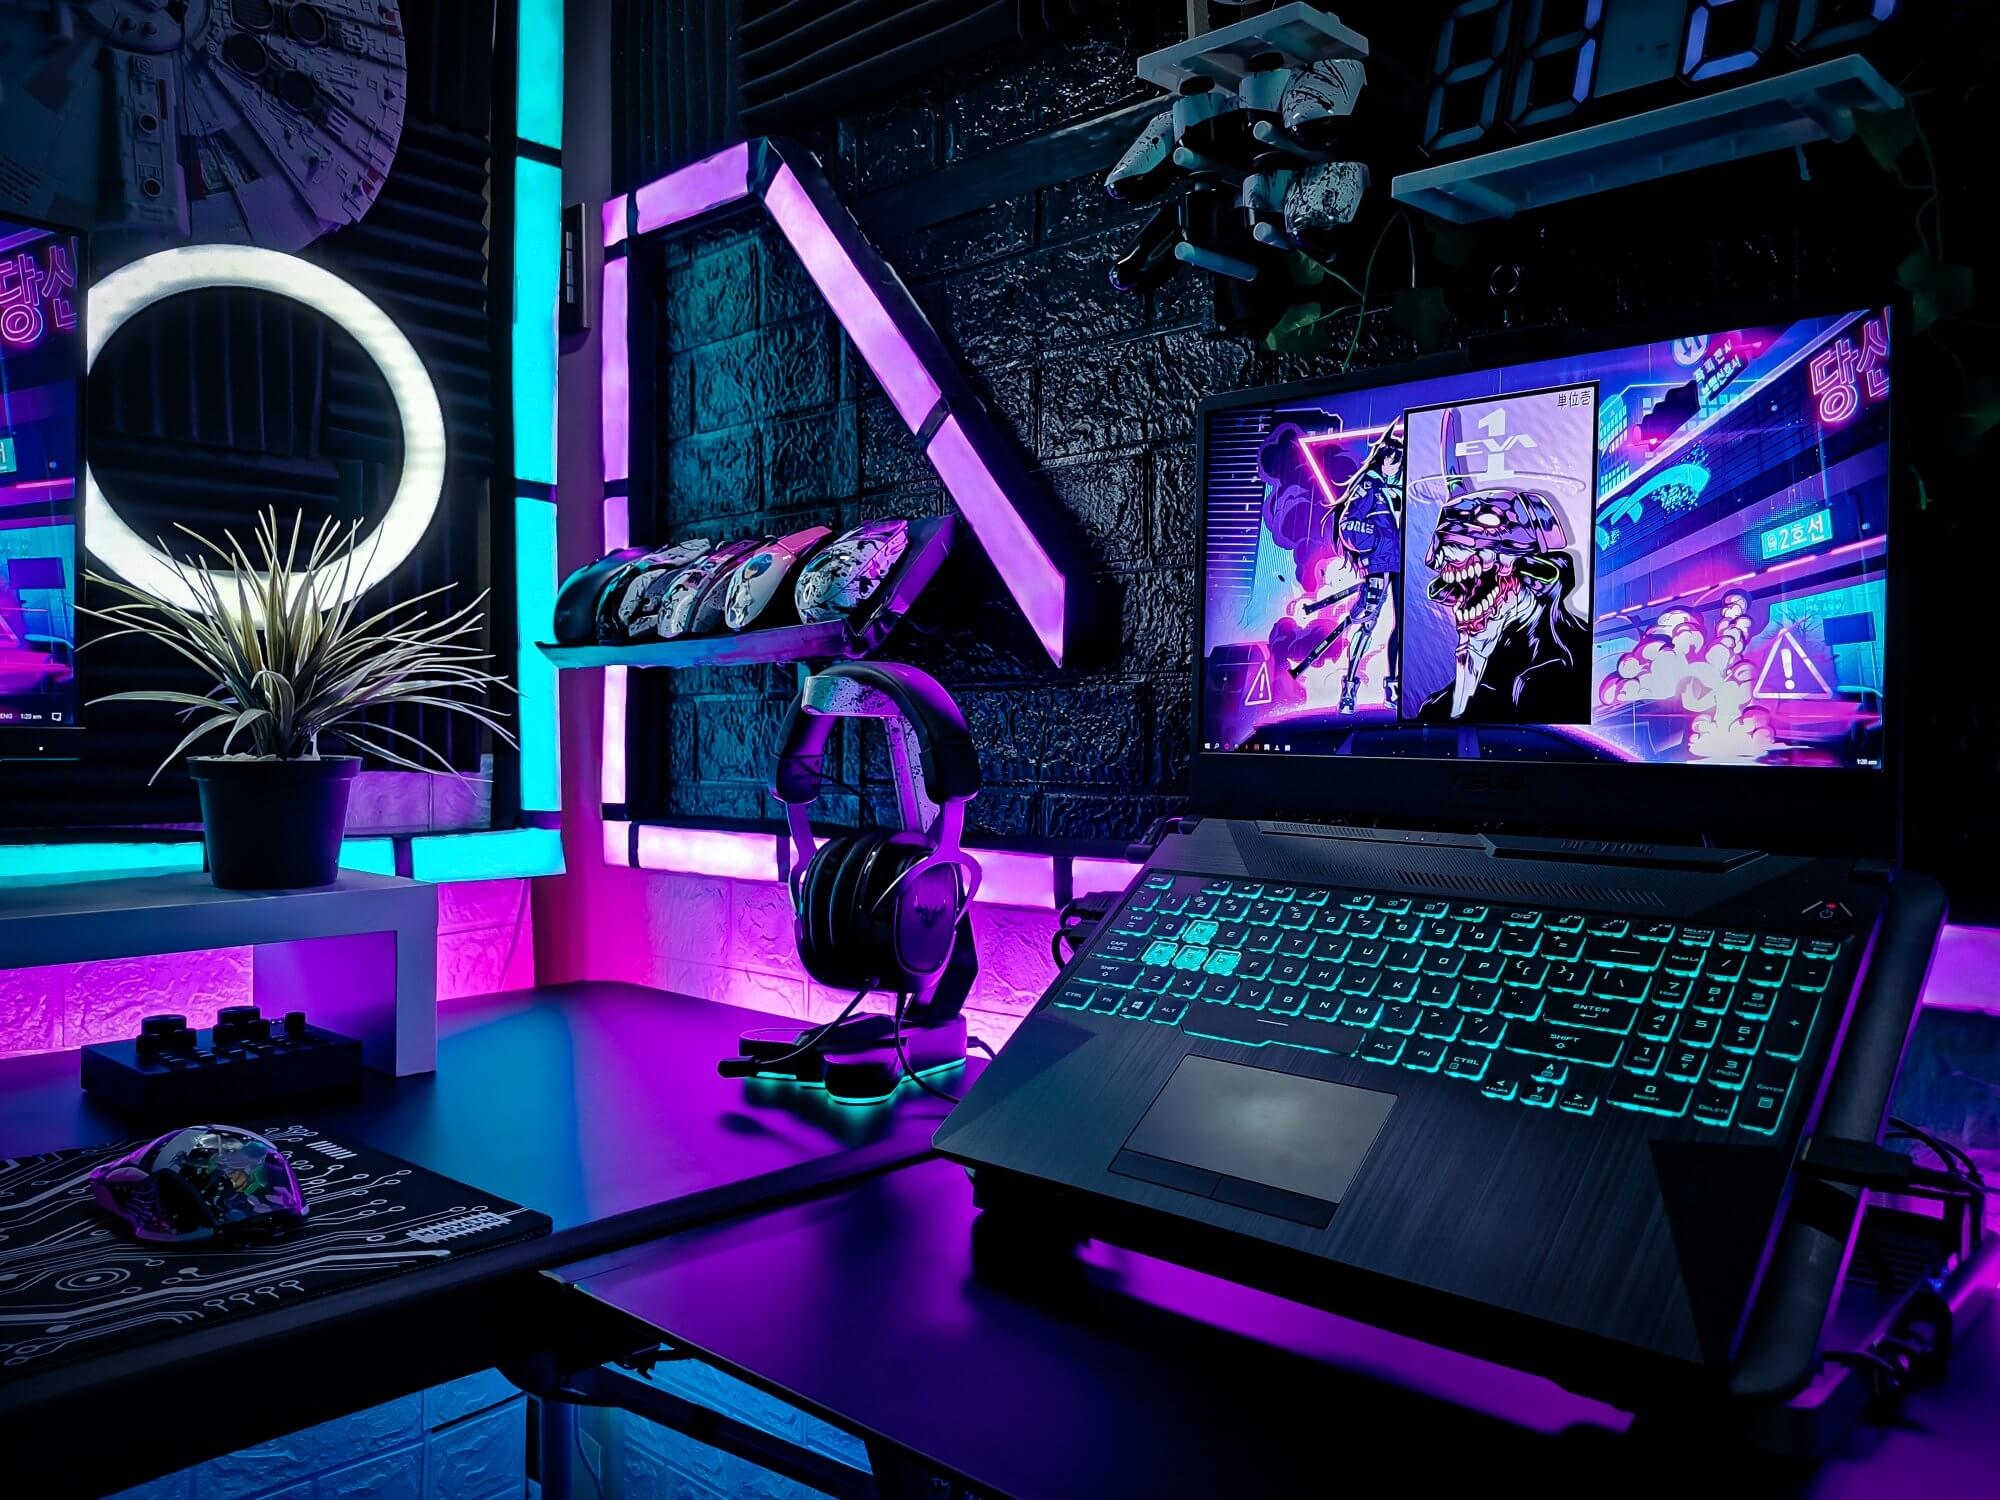 Every single detail in Gerwyn's Cyberpunk-themed desk setup is carefully thought through